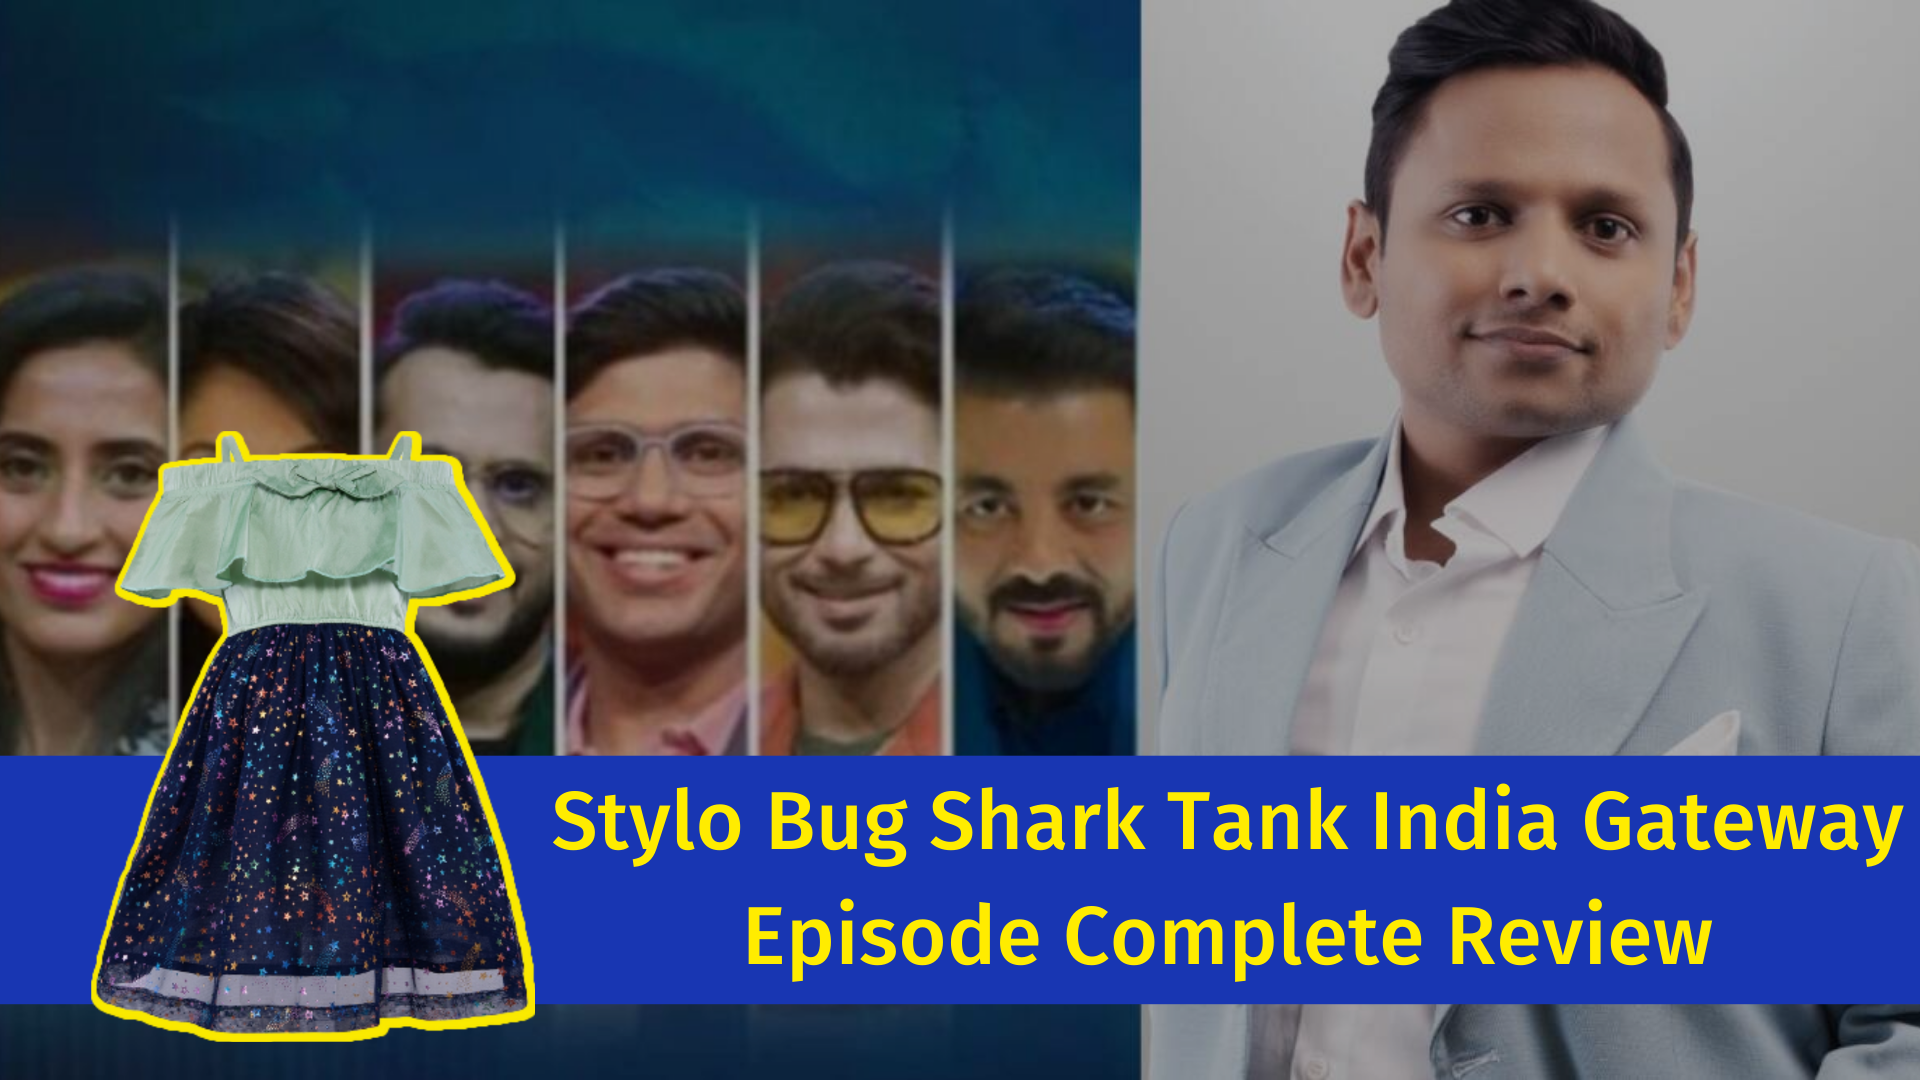 Stylo Bug Shark Tank India Gateway Episode Complete Review